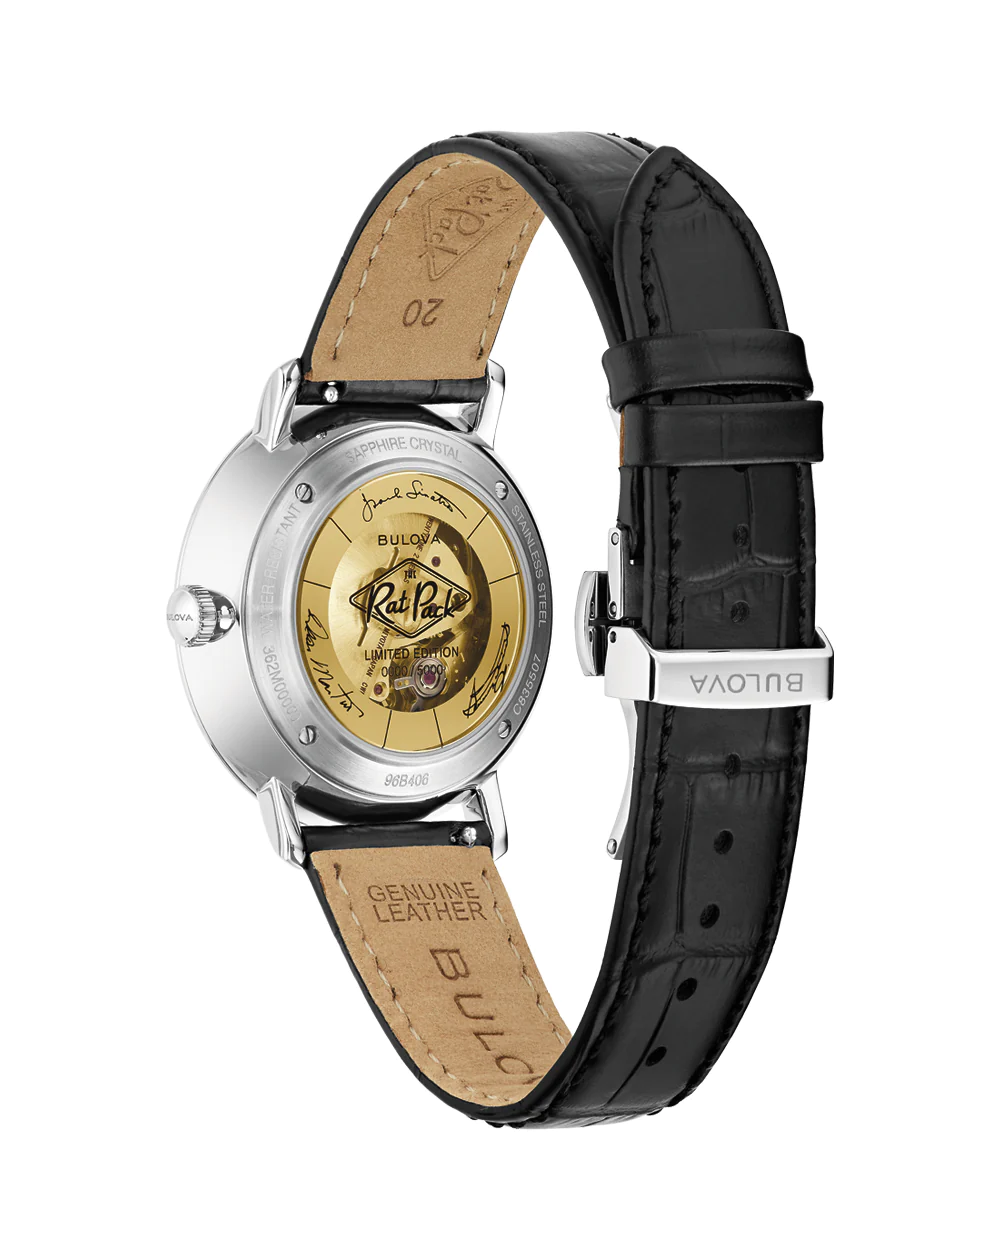 Limited Edition Bulova The Rat Pack Watch